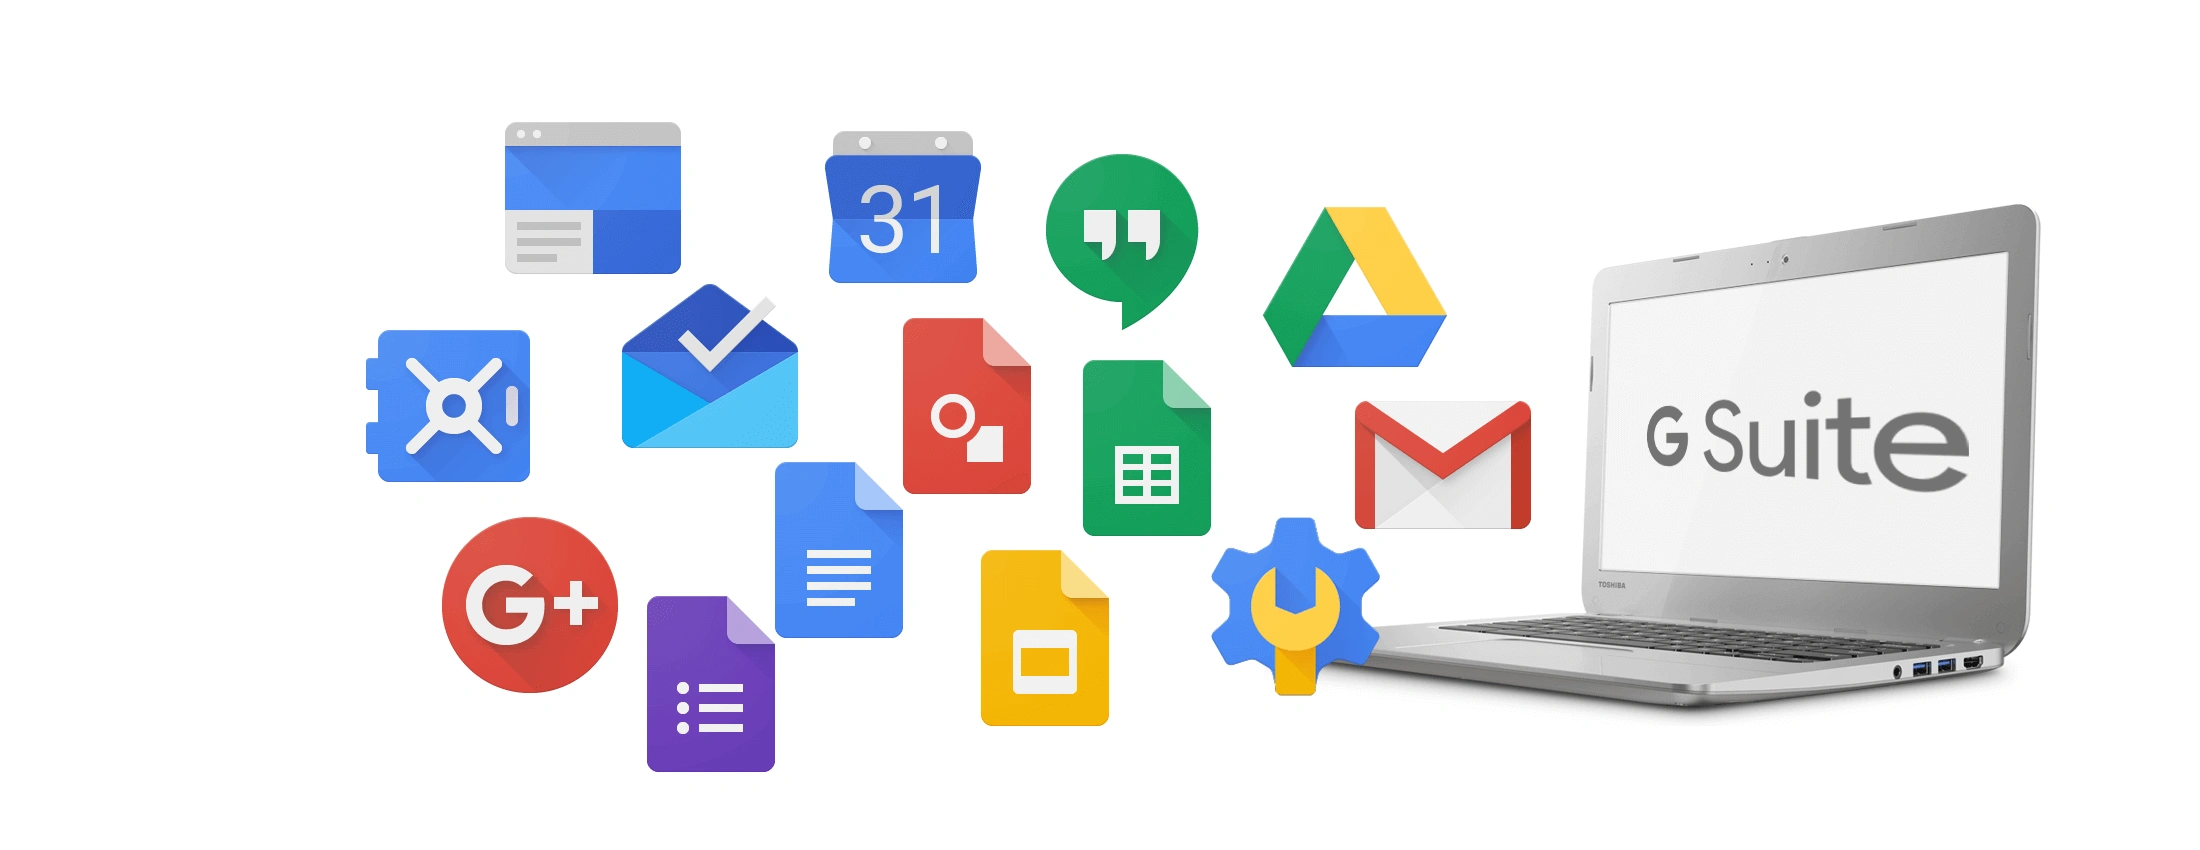 Scripts and tips to backup G Suite for free image